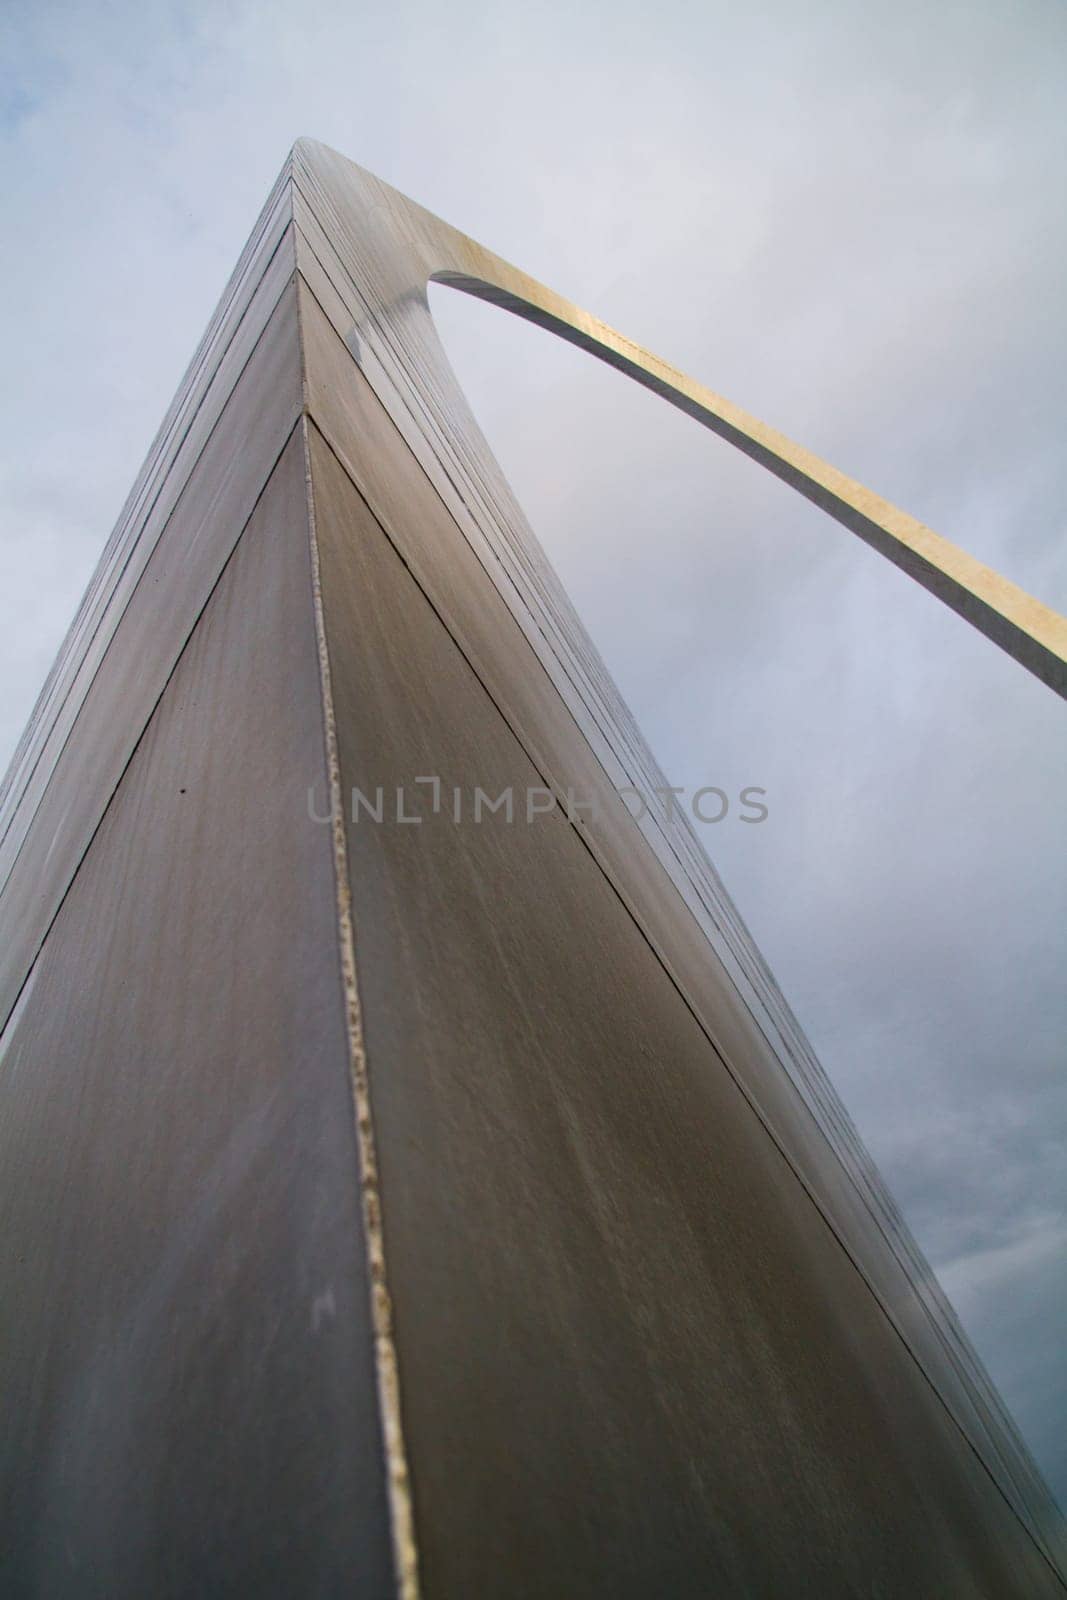 Iconic St. Louis Arch: Captivating modern architecture rises above the clouds, showcasing sleek stainless steel and clean lines. A symbol of innovation and urban development in Missouri.